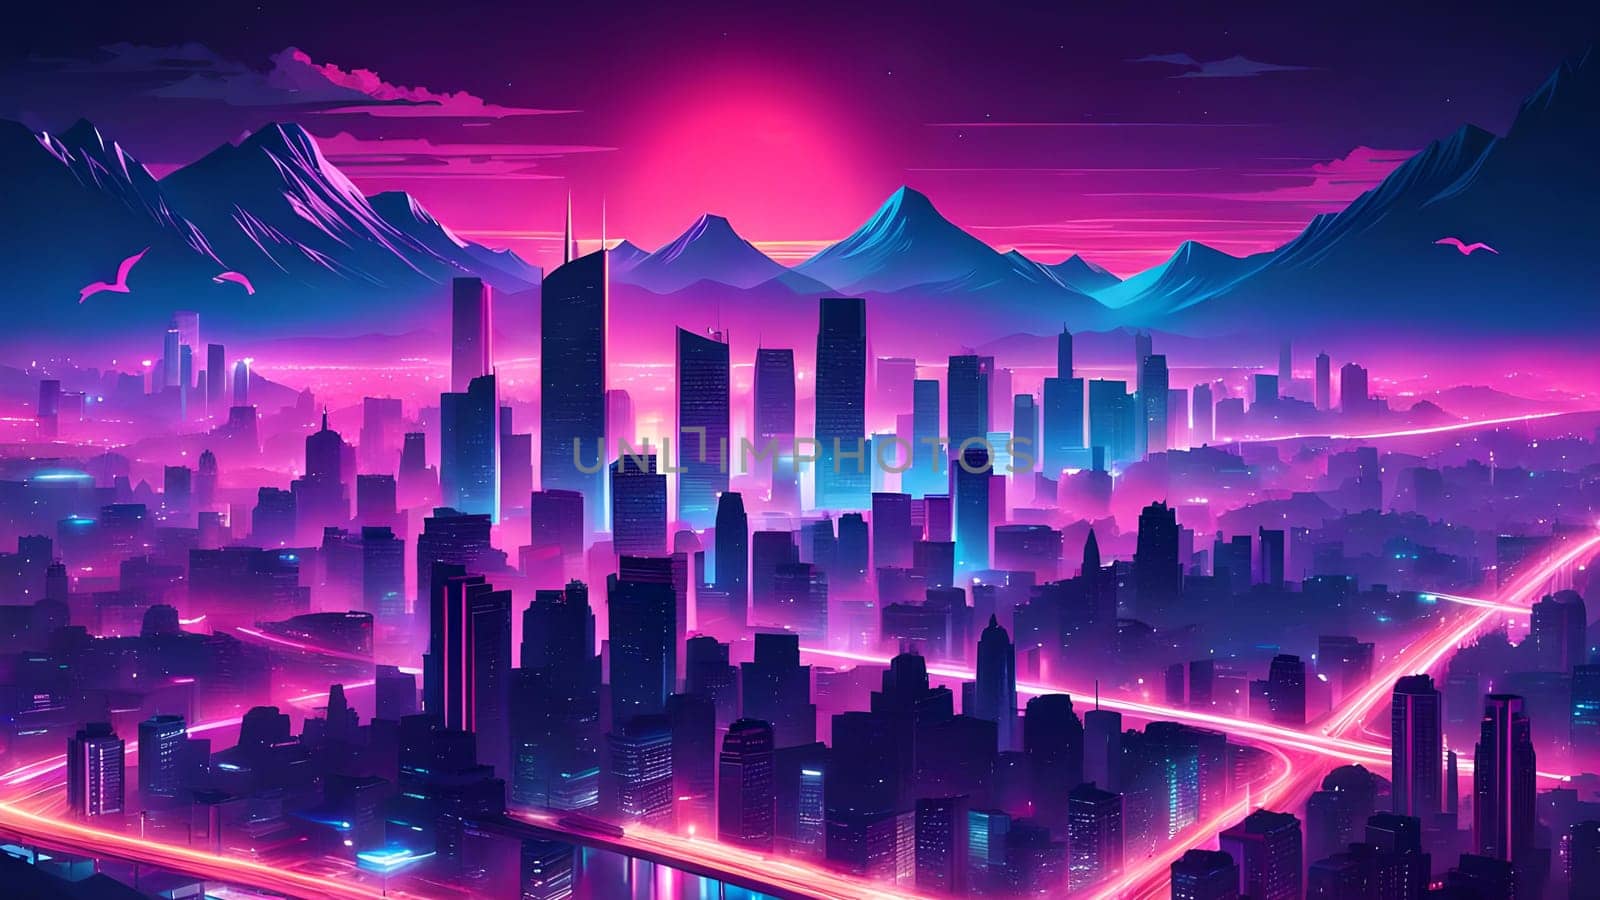 Birdview of a city with skyscrapers made in synthwave colors. In the distance are mountains visible with a setting sun.